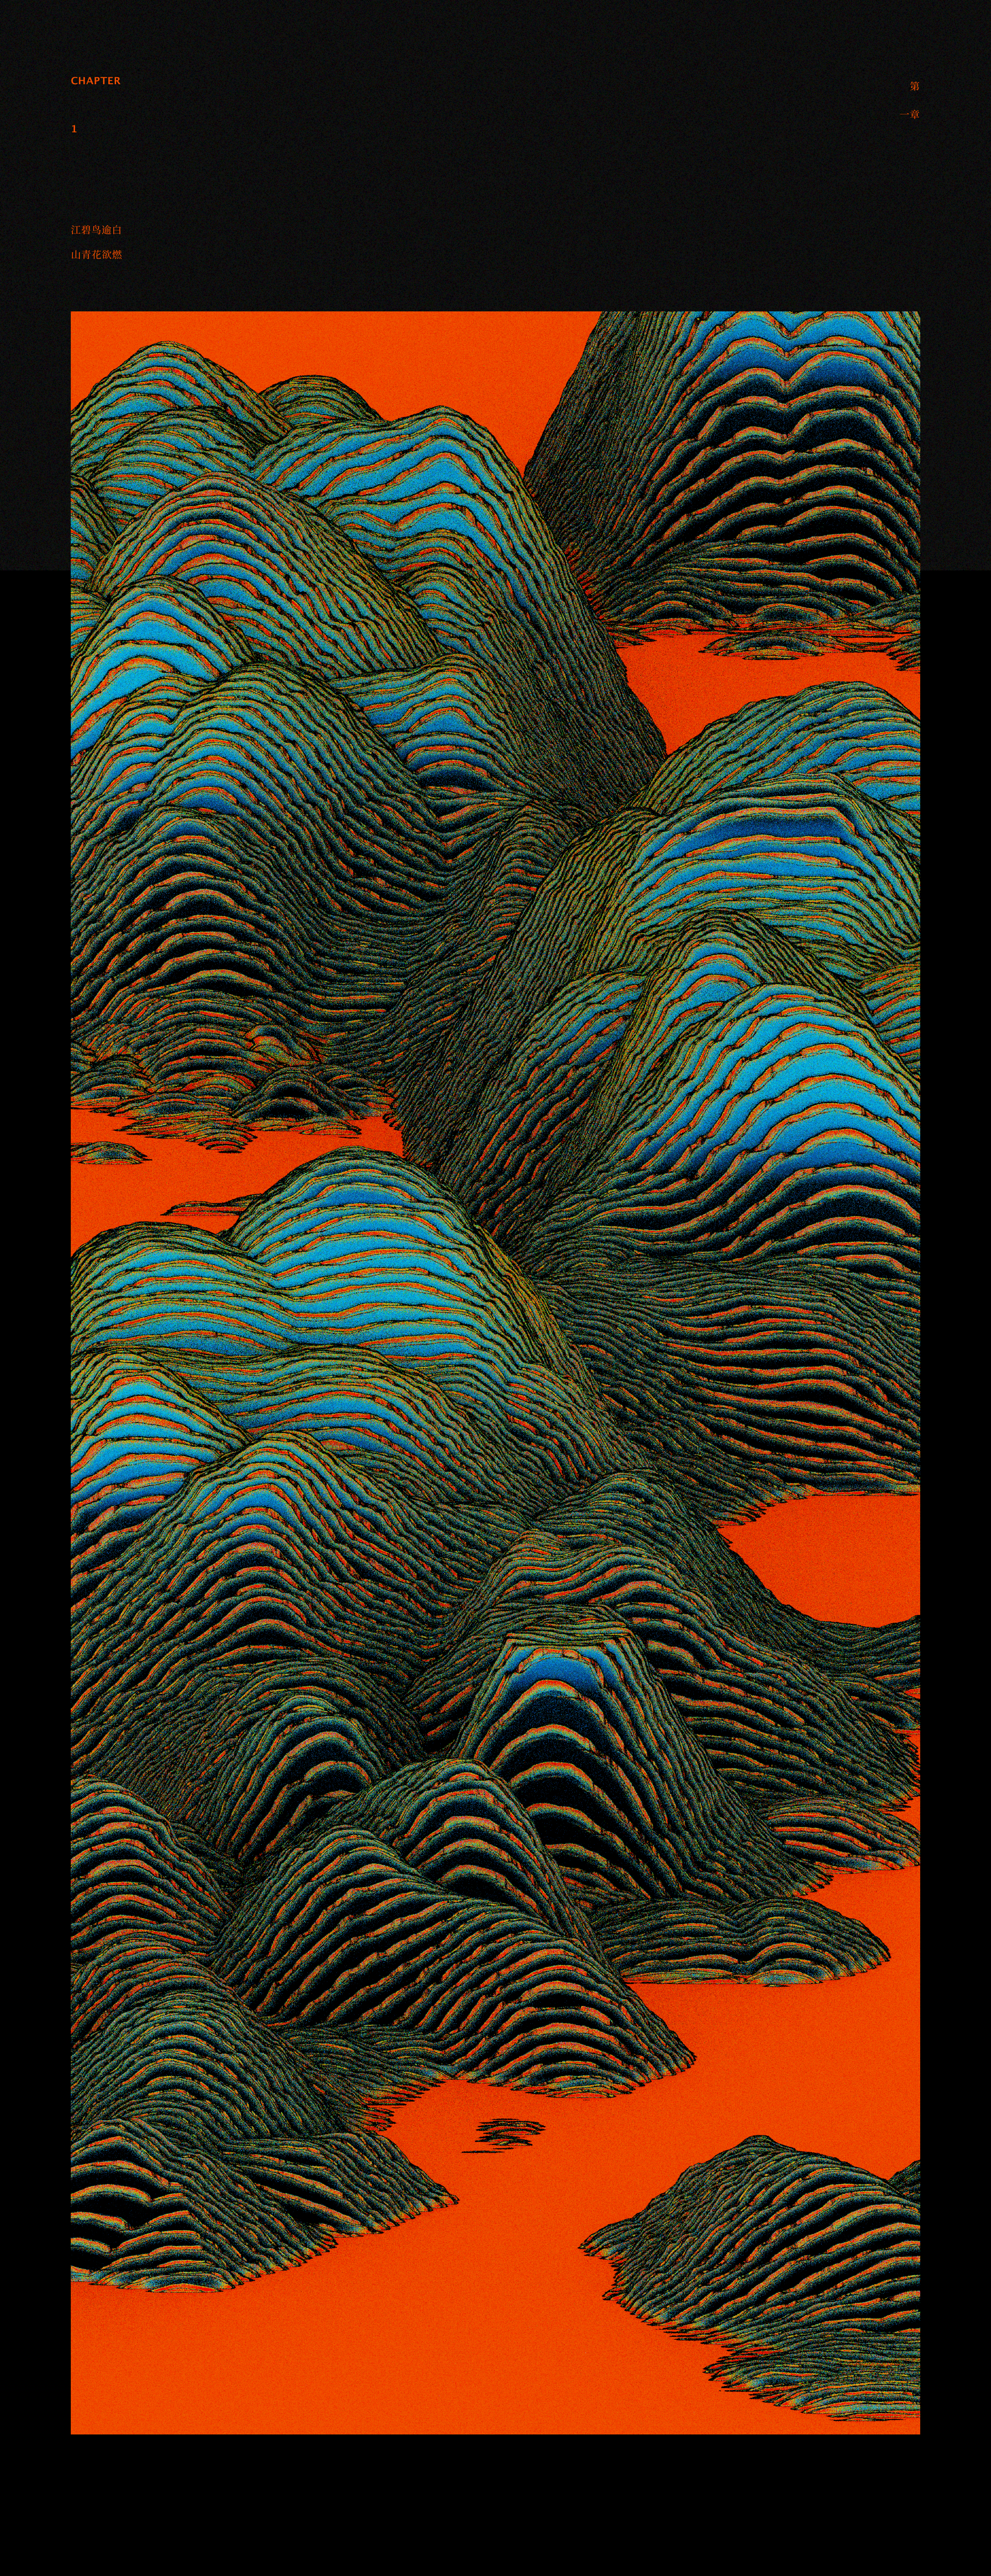 \u5c71\u6c34 Mountains & Rivers on Behance2bb26d84213899.5d57e36e22fbc.png